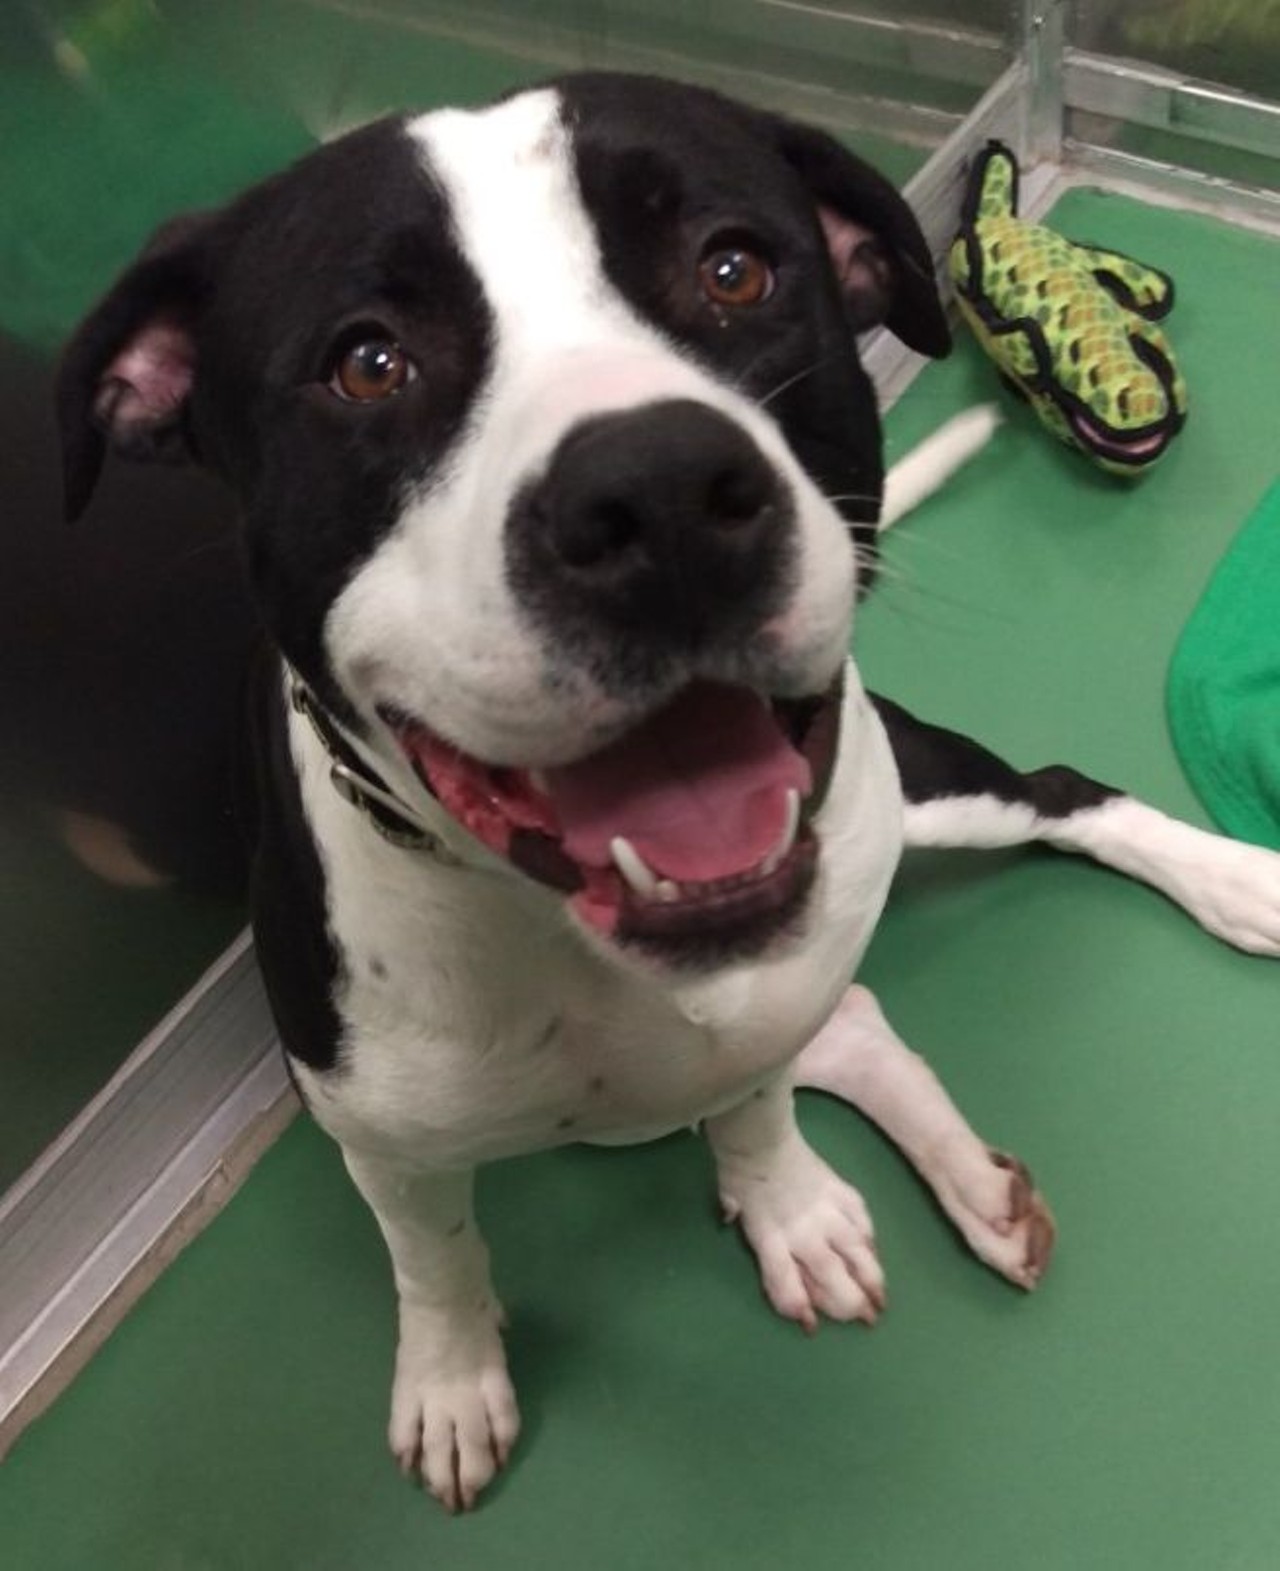 NAME: Harry
GENDER: Male
BREED: Labrador Retriever-Pit Bull Terrier mix
AGE: 1 year, 6 months
WEIGHT: 75 pounds
SPECIAL CONSIDERATIONS: None
REASON I CAME TO MHS: Partner transfer
LOCATION: Petco of Sterling Heights
ID NUMBER: 864989